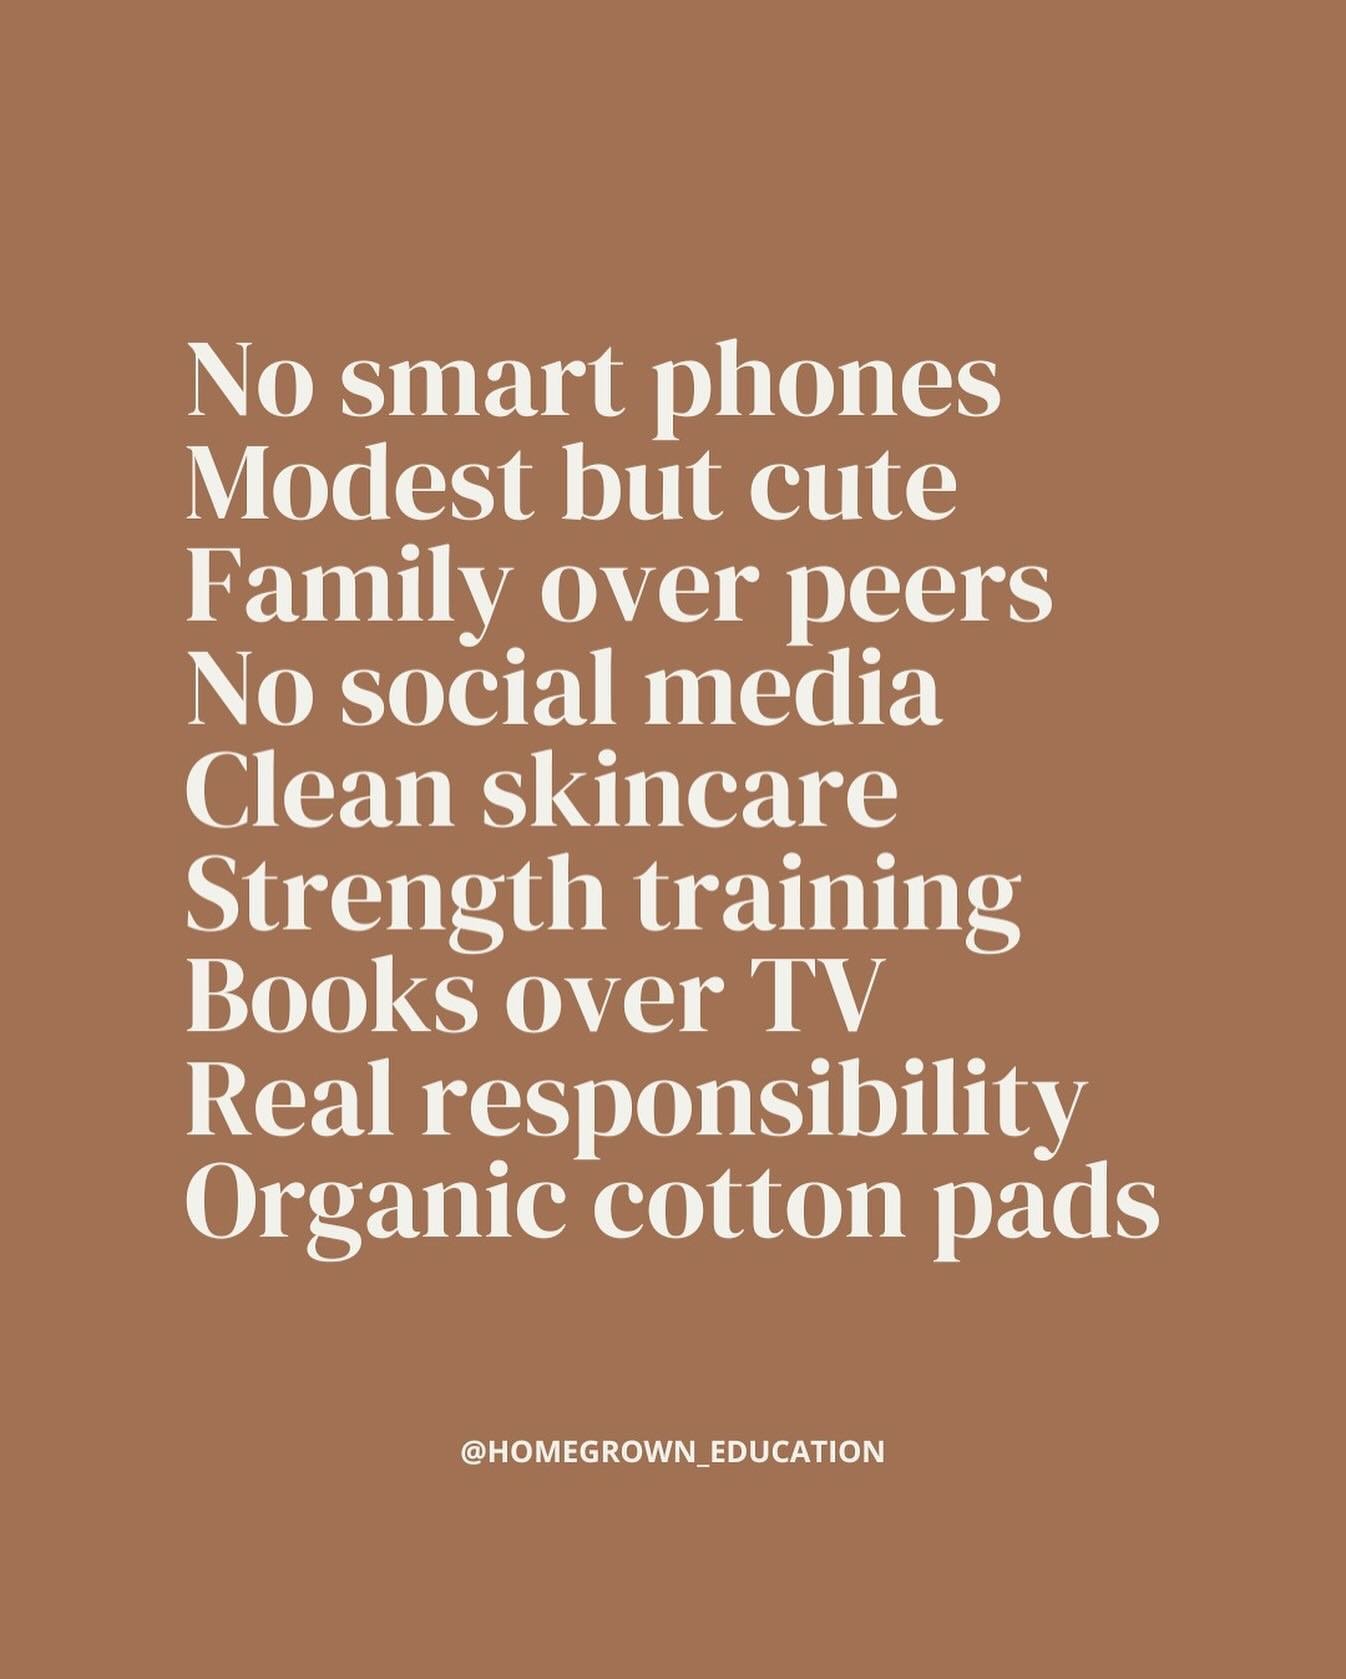 TEEN GIRL EDITION 🌸
-our oldest doesn&rsquo;t have a phone yet and when she gets one, it won&rsquo;t be a smartphone. Call and texting is all we need.
-from swimsuits to short lengths, modesty is important but so is feeling GOOD in your clothes. Gro